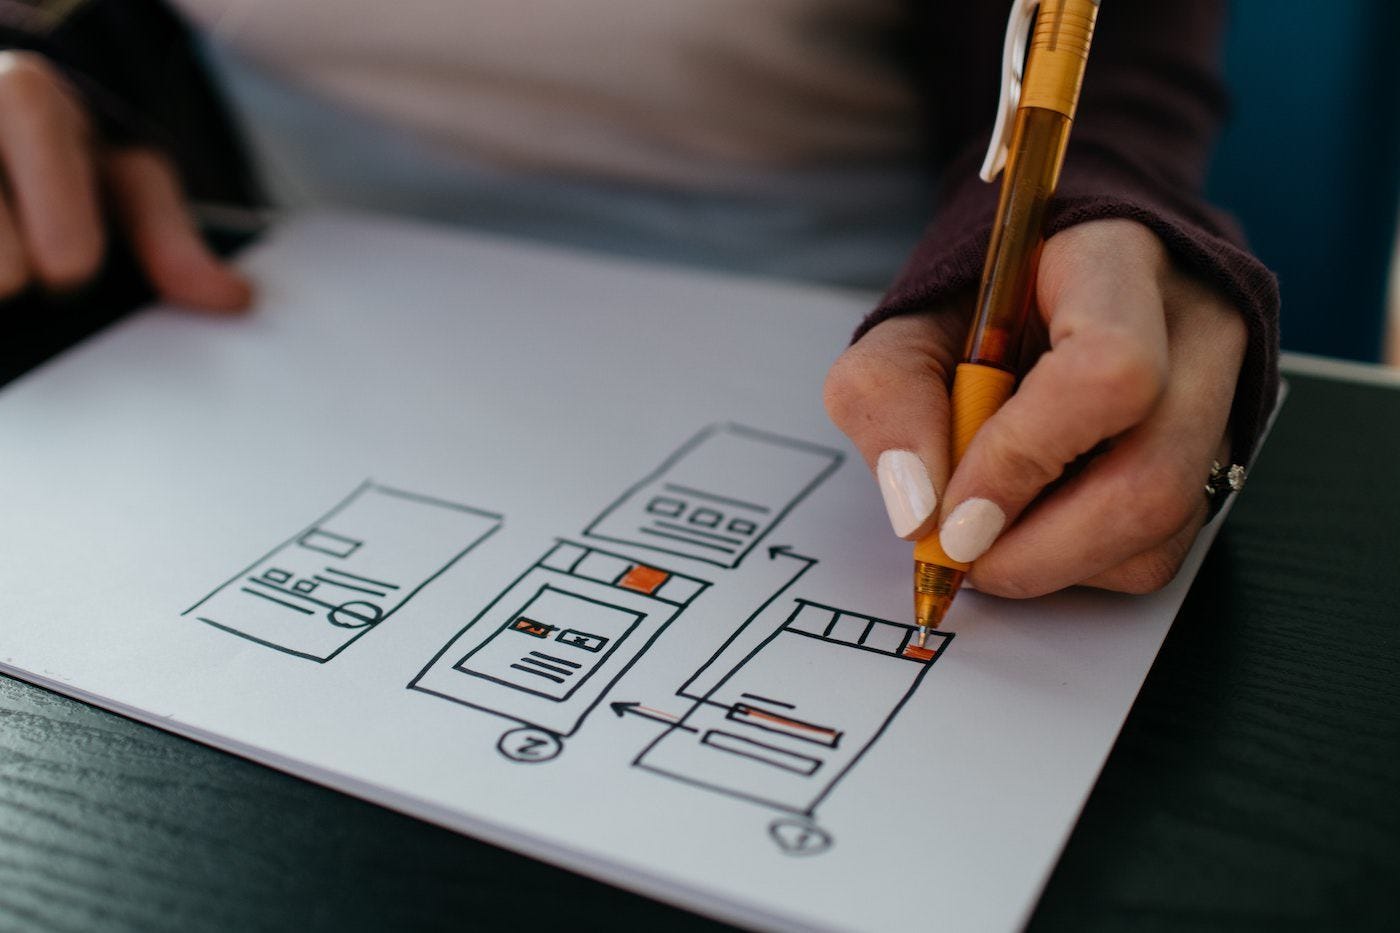 The Graphic Designer's Guide to Becoming a UX Designer